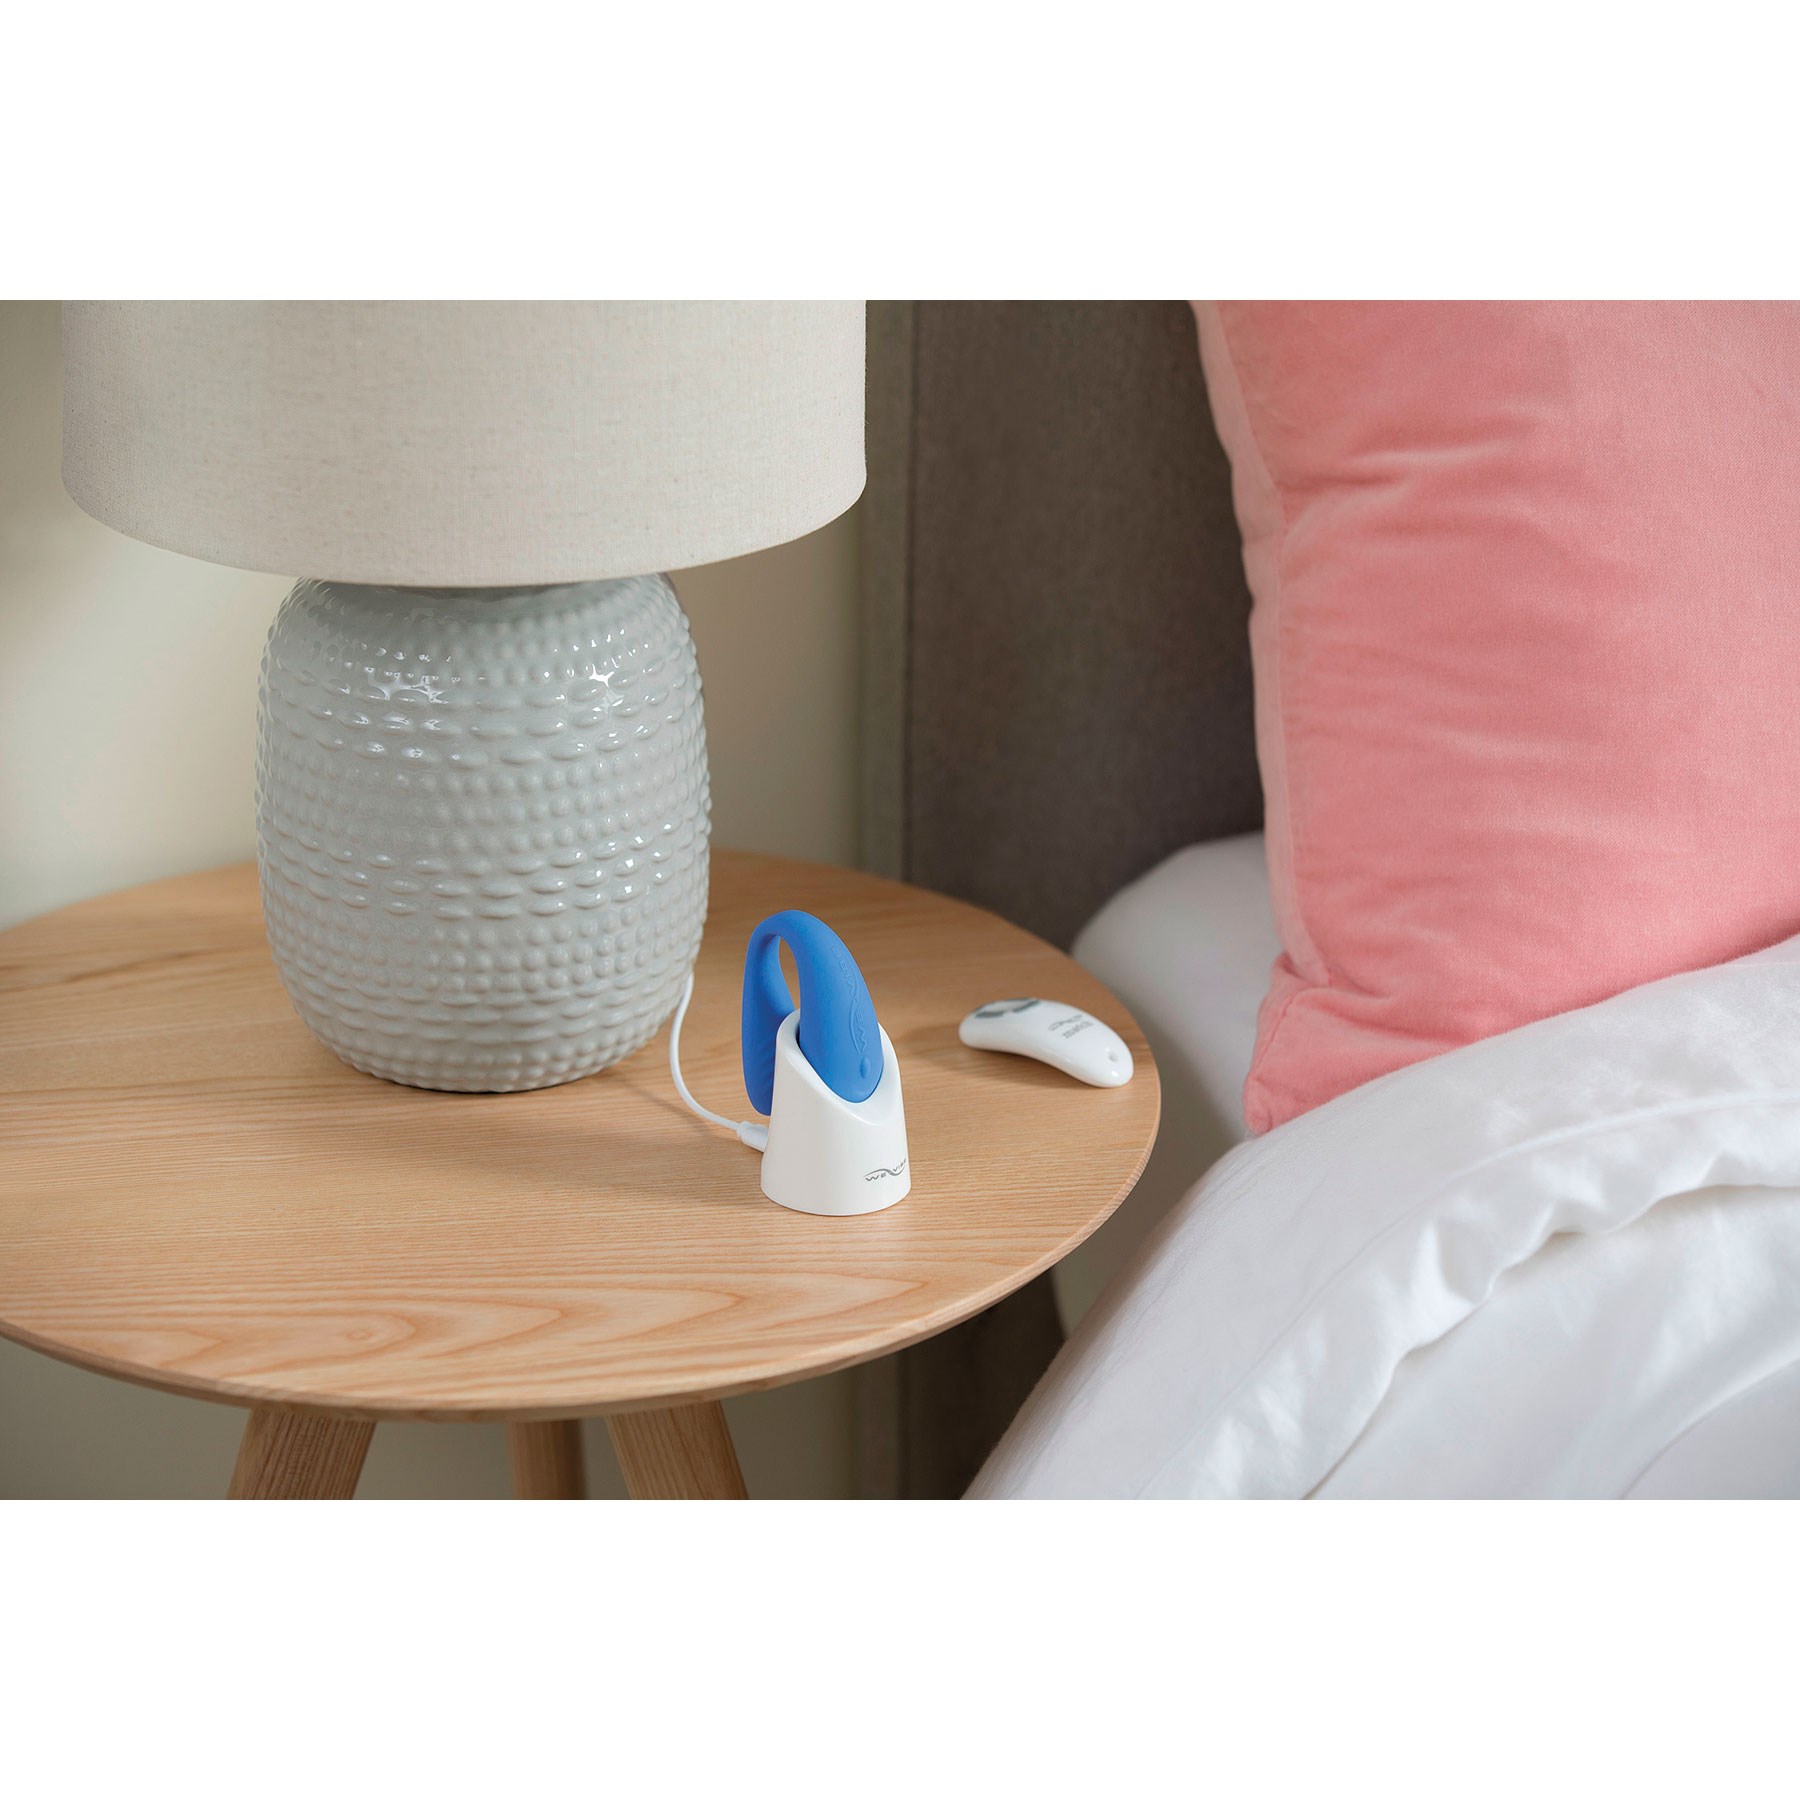 We-Vibe Match Couples Massager displaying on table